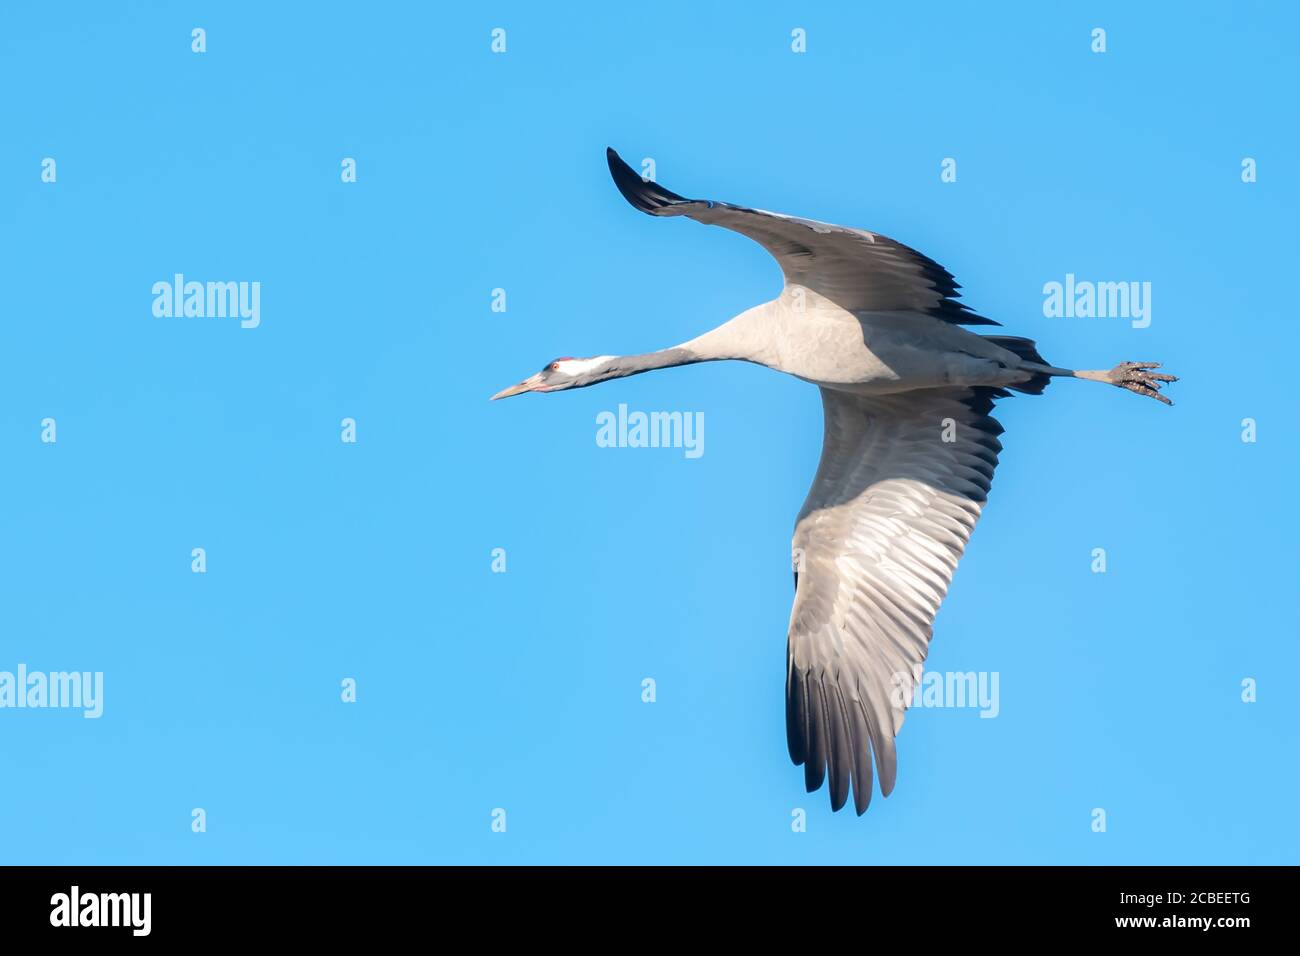 Close up of a single Common crane (Grus grus) in flight. Large migratory crane species that lives in wet meadows and marshland. It has a wingspan of b Stock Photo